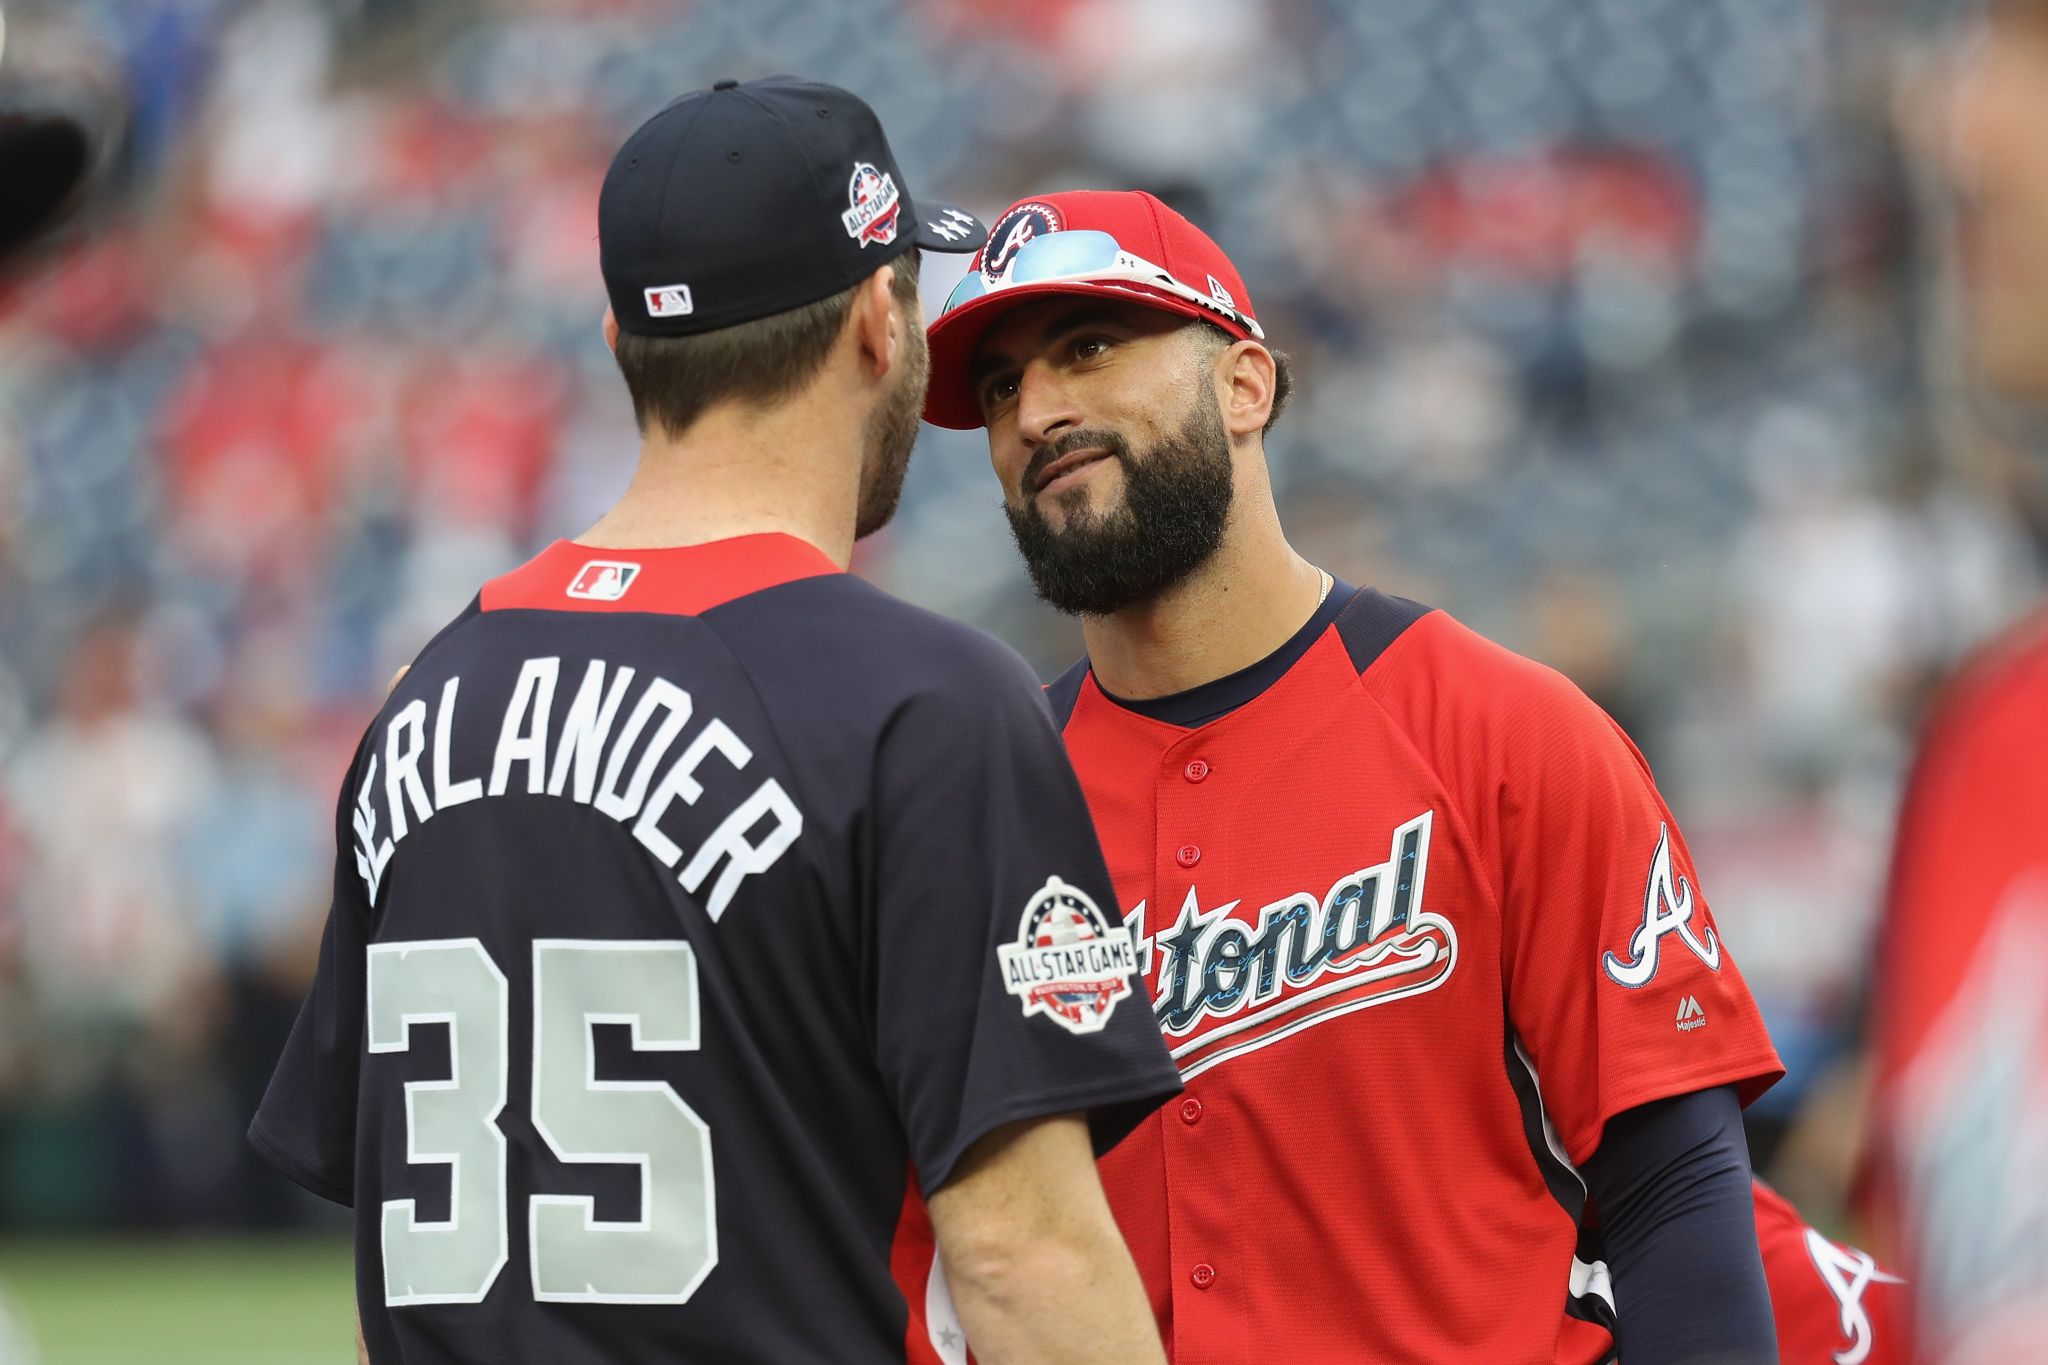 After 15 years and 2,388 hits, Nick Markakis announced his